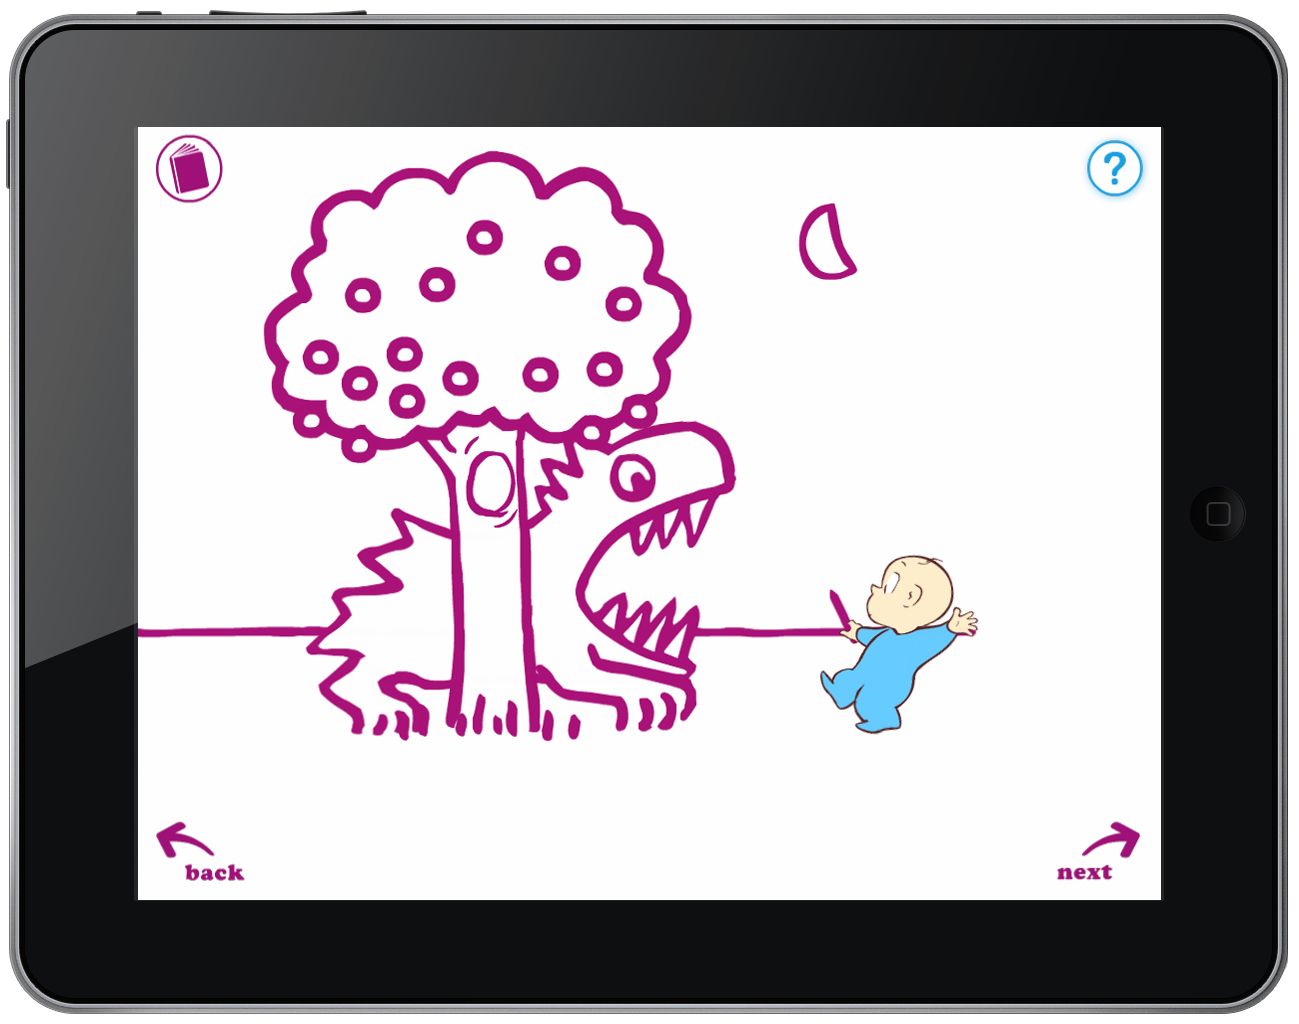 Coolest apps for preschoolers: Harold and the Purple Crayon